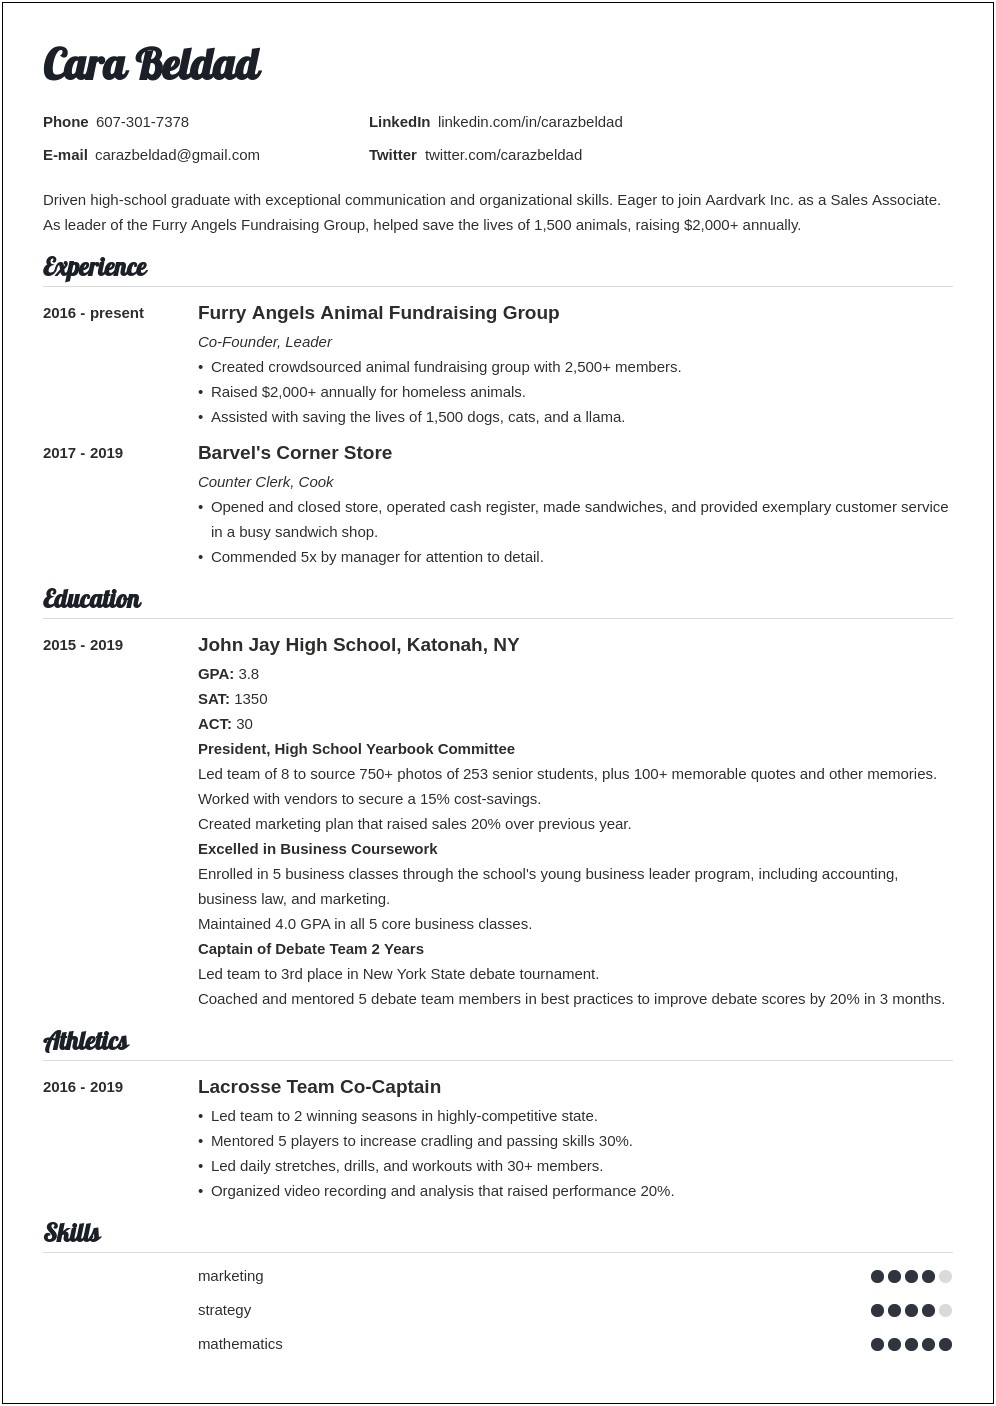 Education Experience In Job Resume